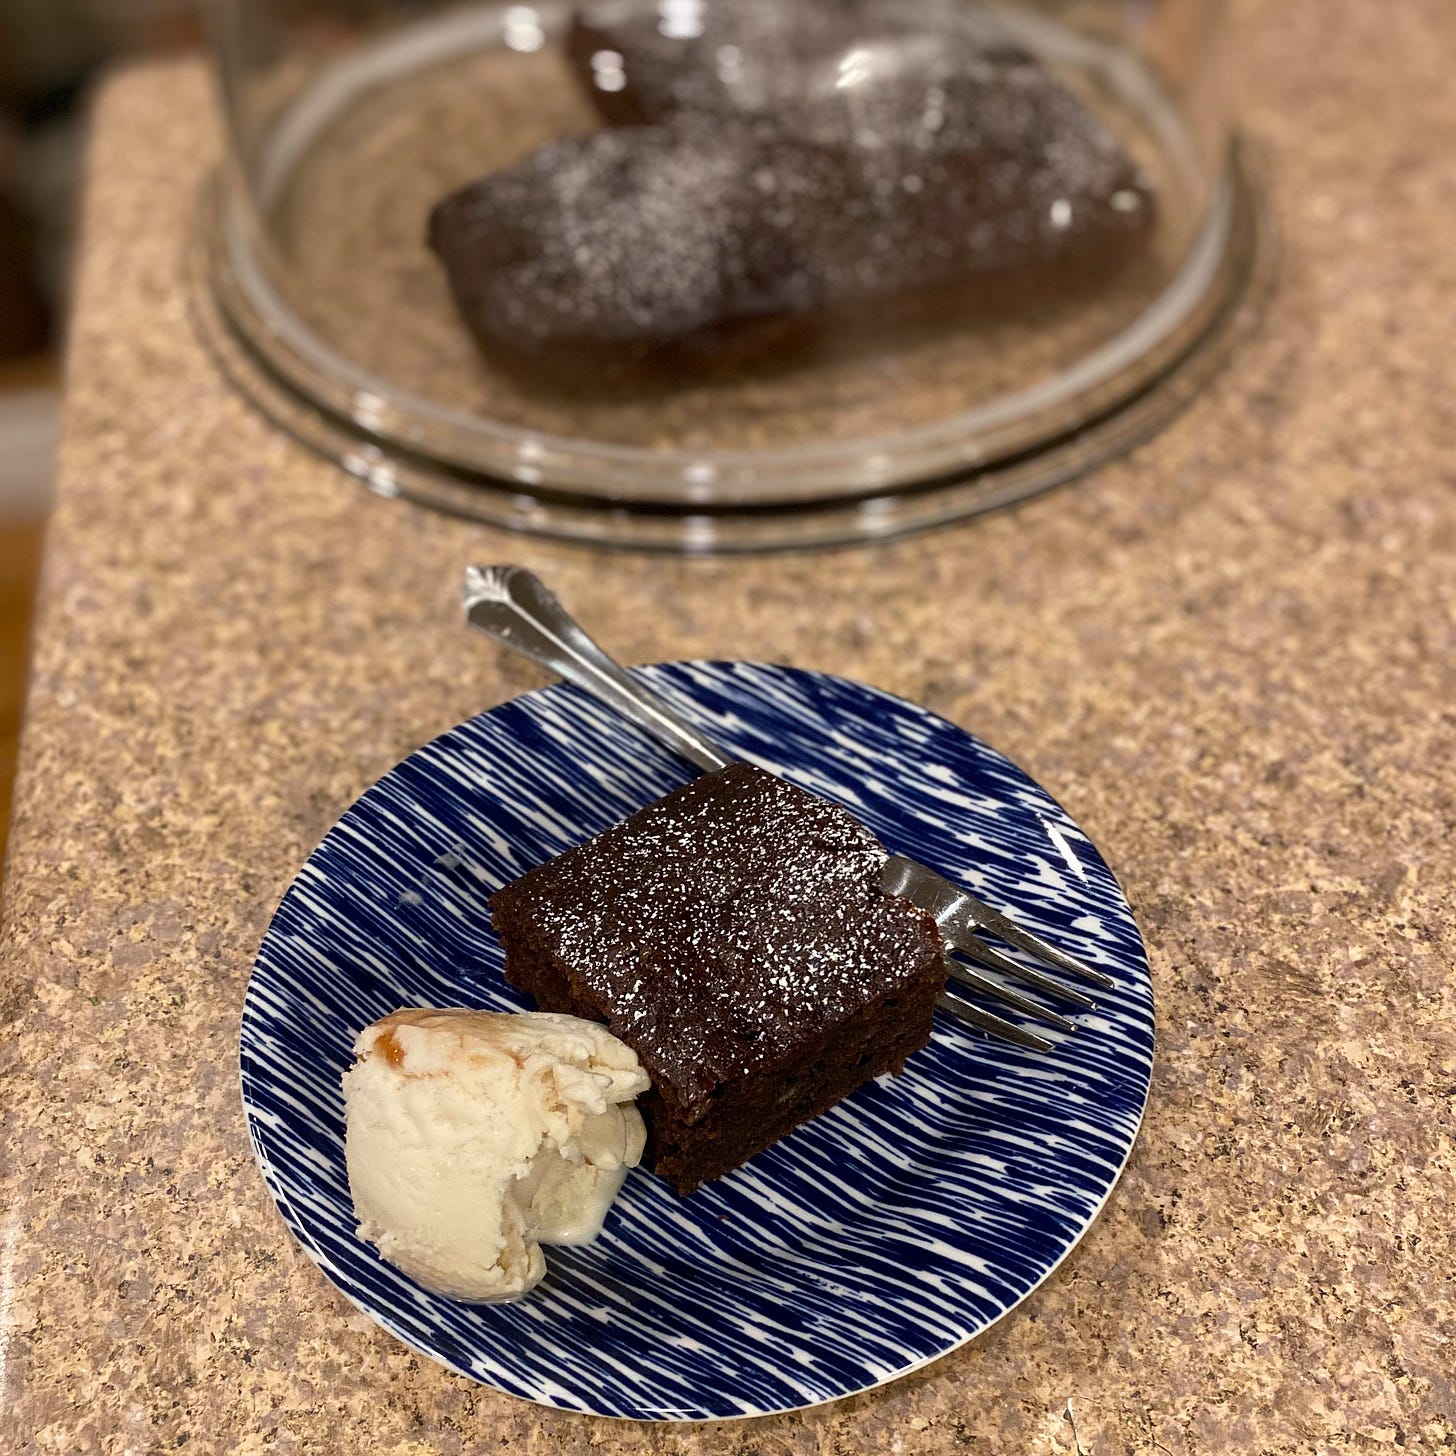 On a small blue and white plate, a square of chocolate cake dusted with powdered sugar next to a scoop of vanilla ice cream with swirls of caramel-coloured syrup in it. A fork rests on the plate, and in the background the rest of the cake sits on a glass cake plate with a cover.